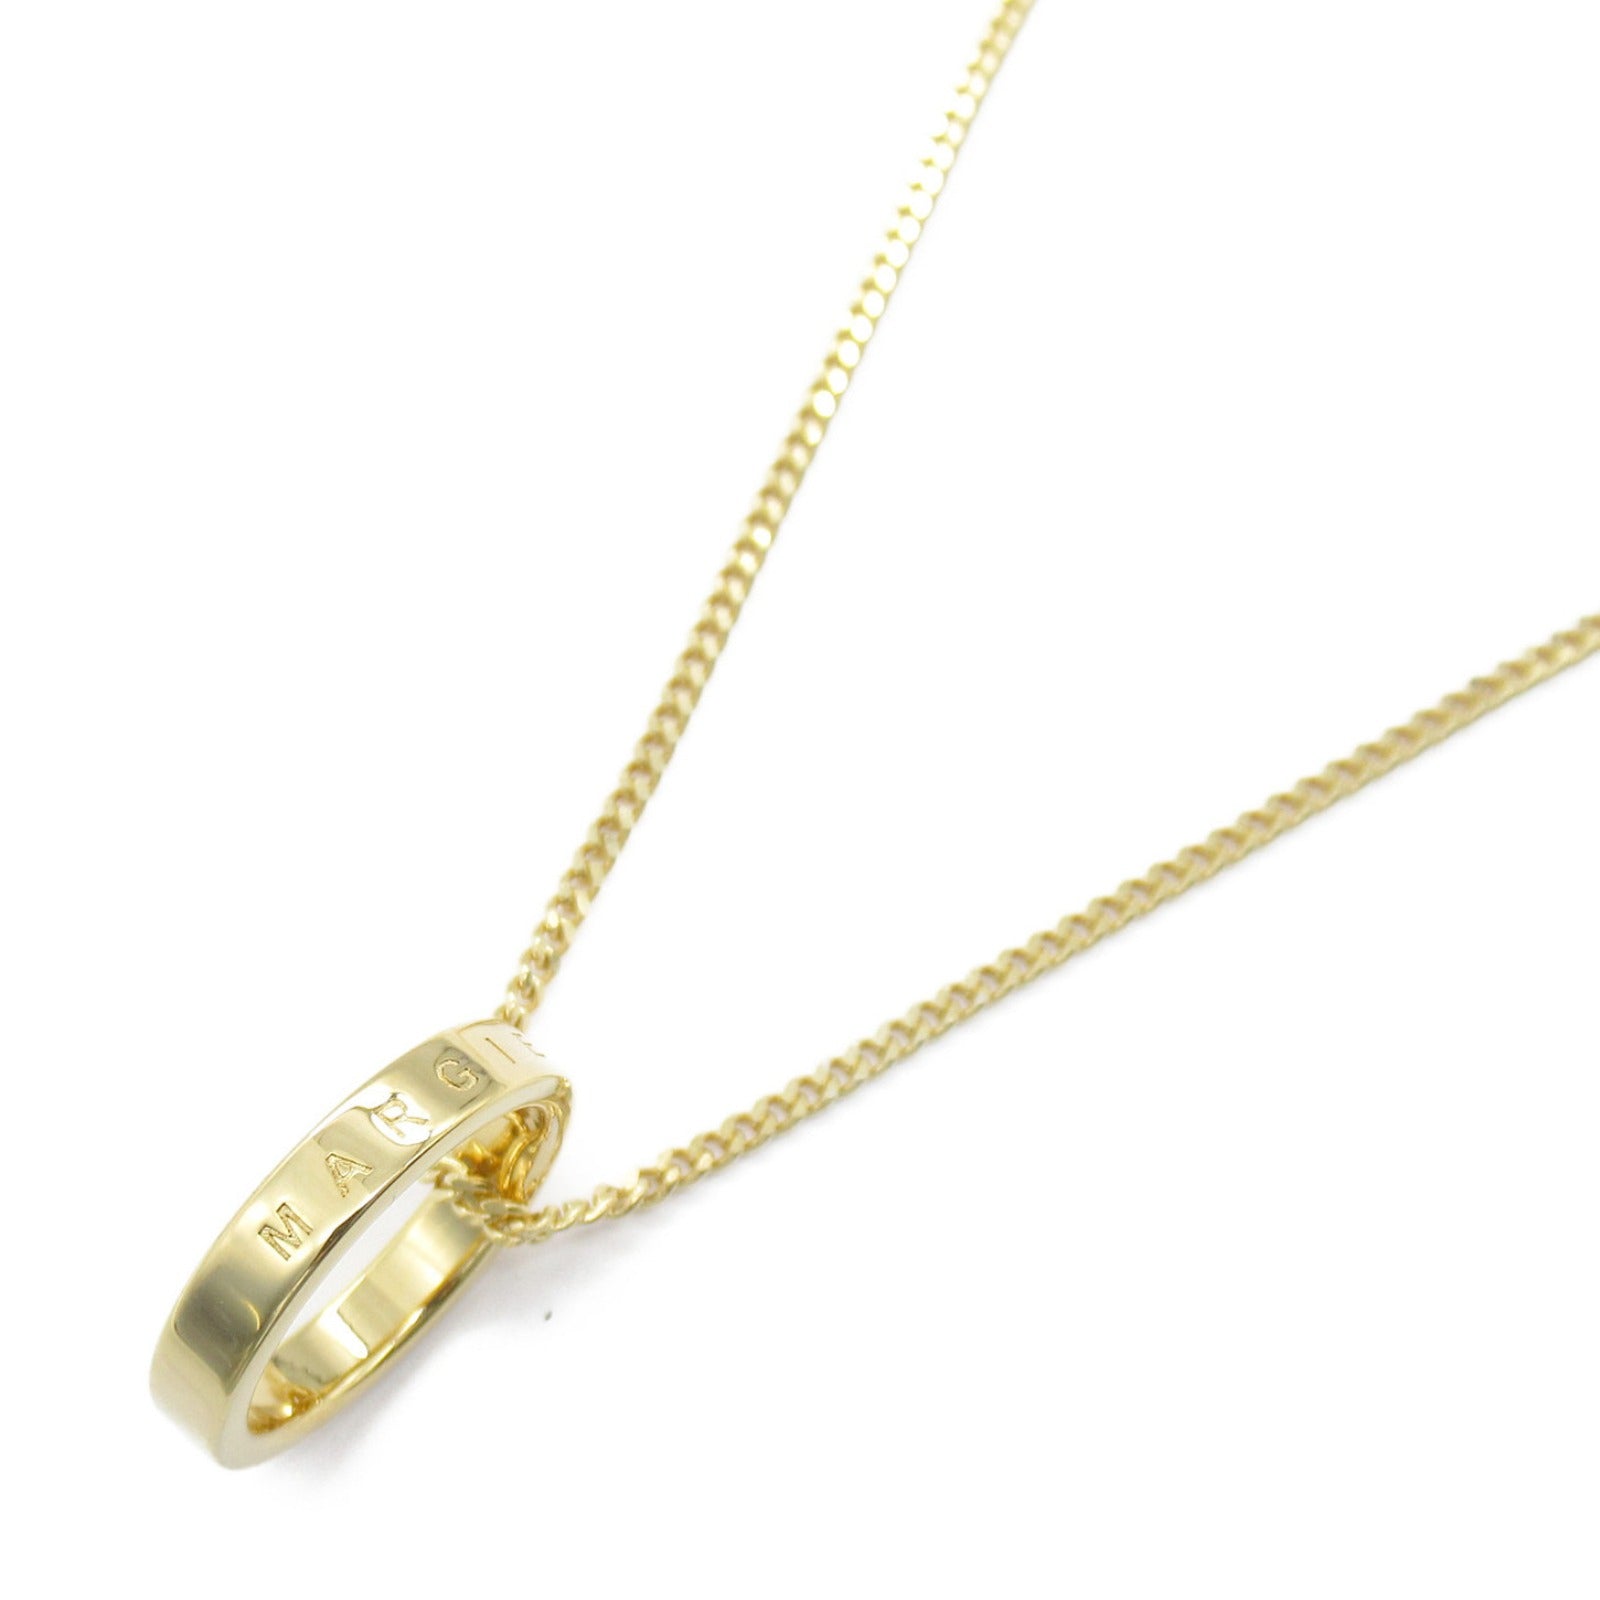 MM6 by Maison Martin Margiela necklace necklace jewelry men's ladies g series SM6UU0020SV0128